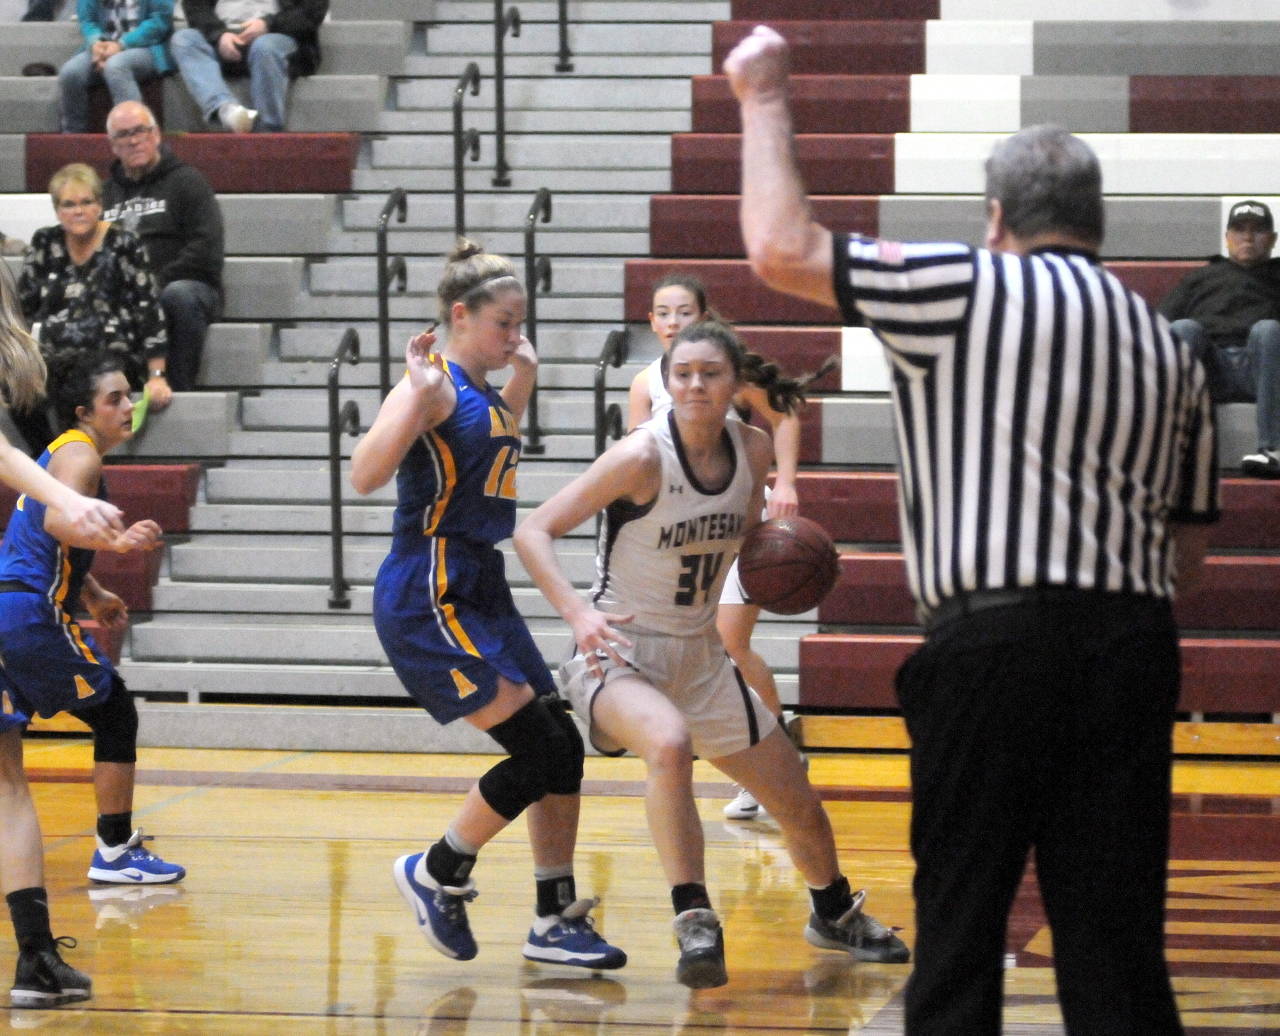 Montesano’s McKynnlie Dalan drives the baseline and is fouled by Adna’s Payton Aselton on Saturday in Montesano. (Ryan Sparks | Grays Harbor News Group)